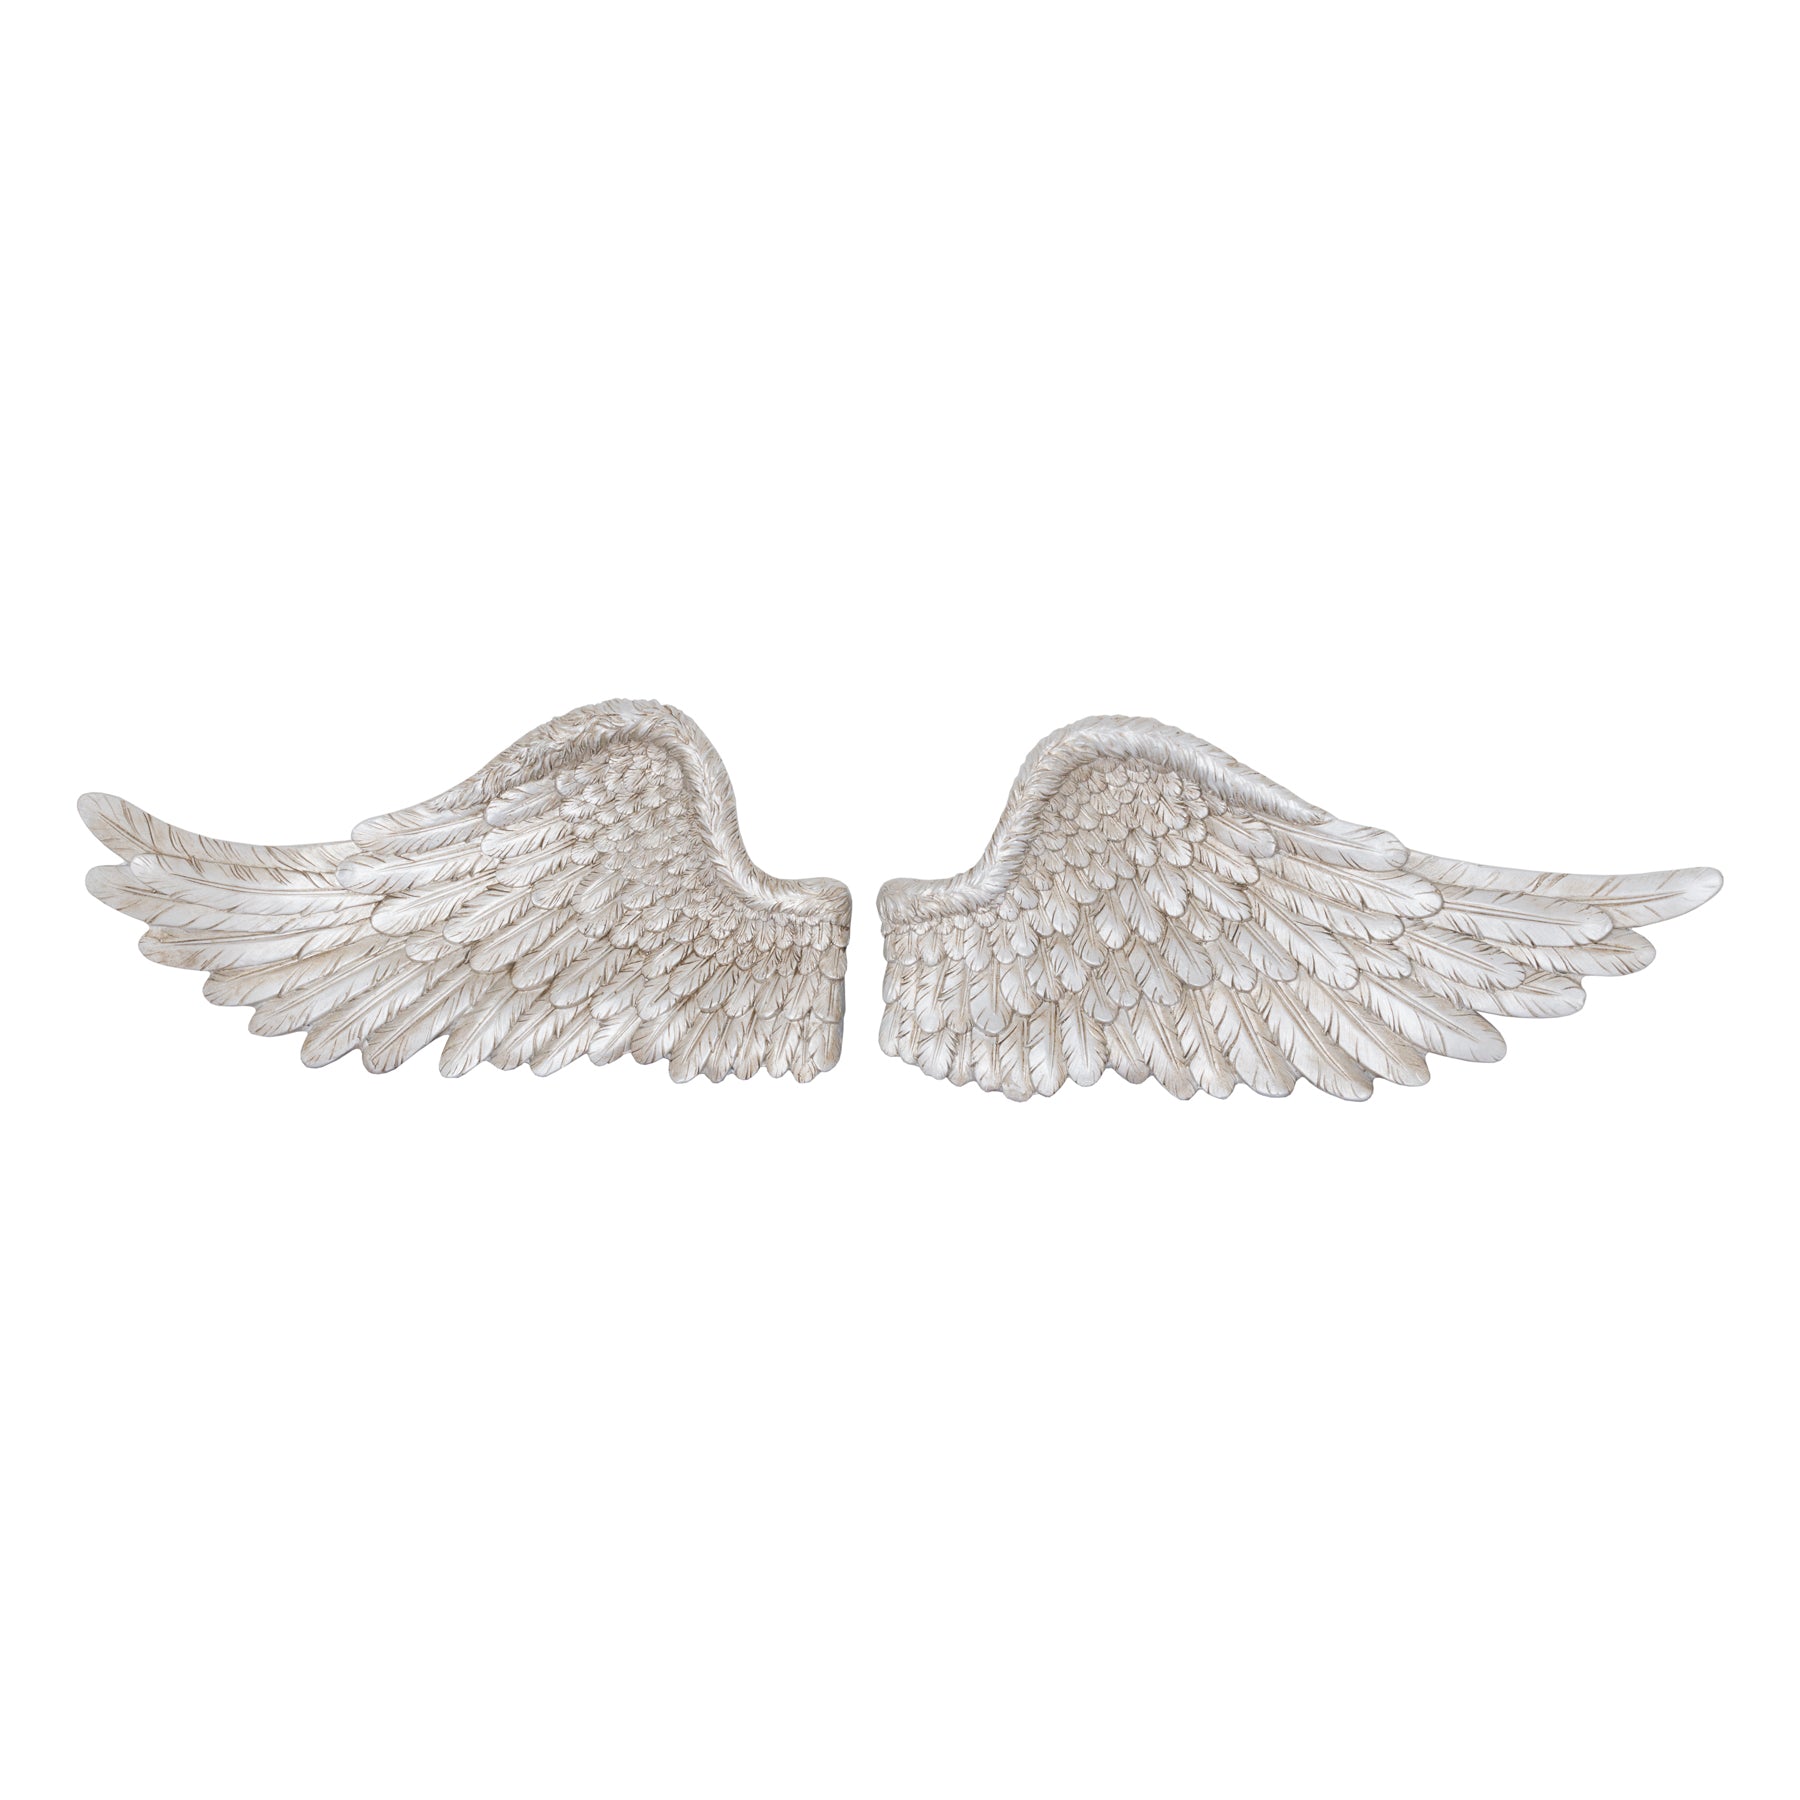 View Antique Silver Horizontal Angel Wings information